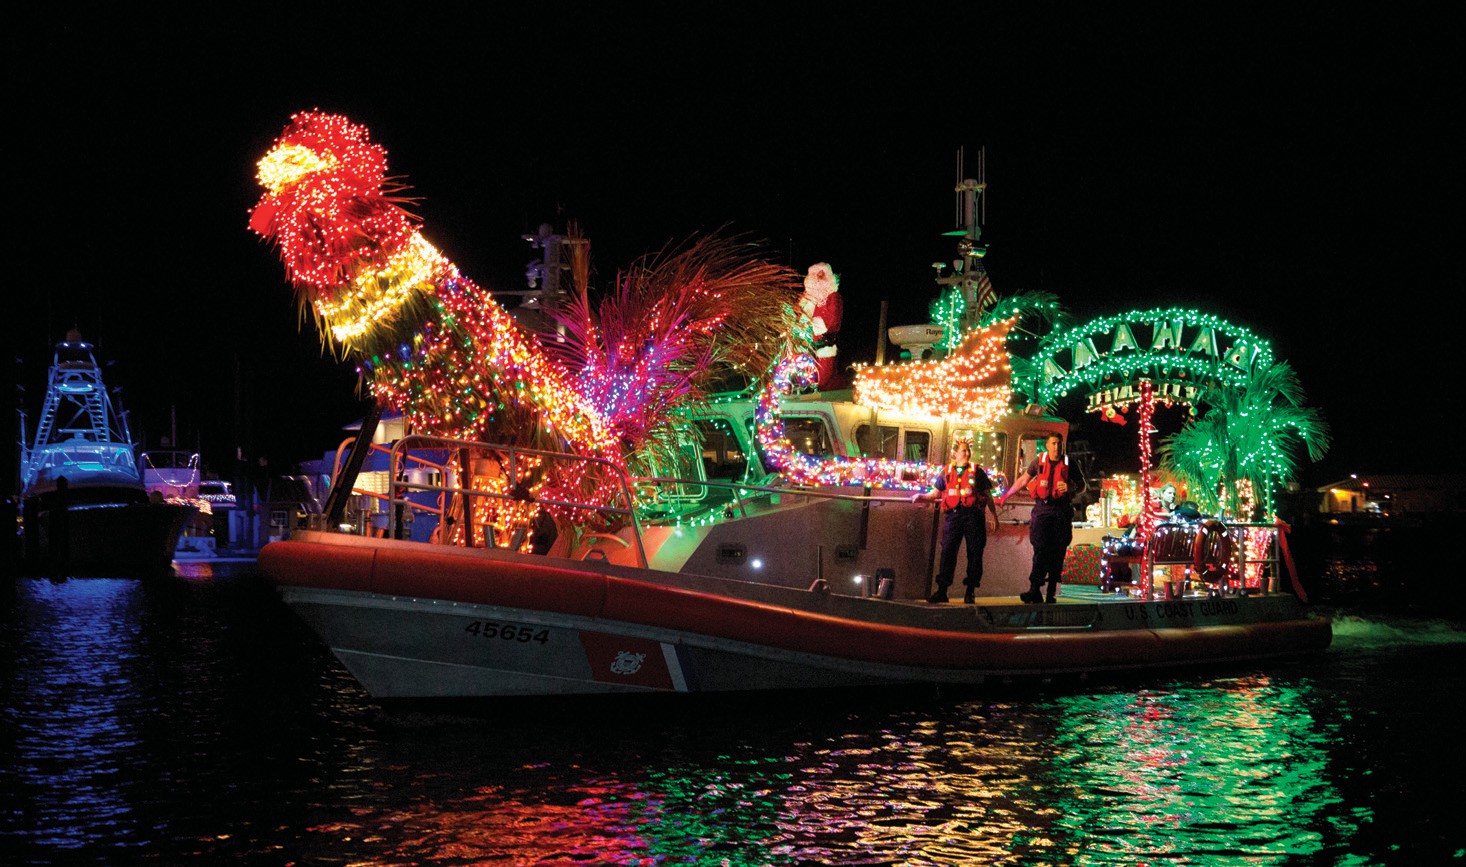 Schooner Wharf Annual Key West Lighted Boat Parade